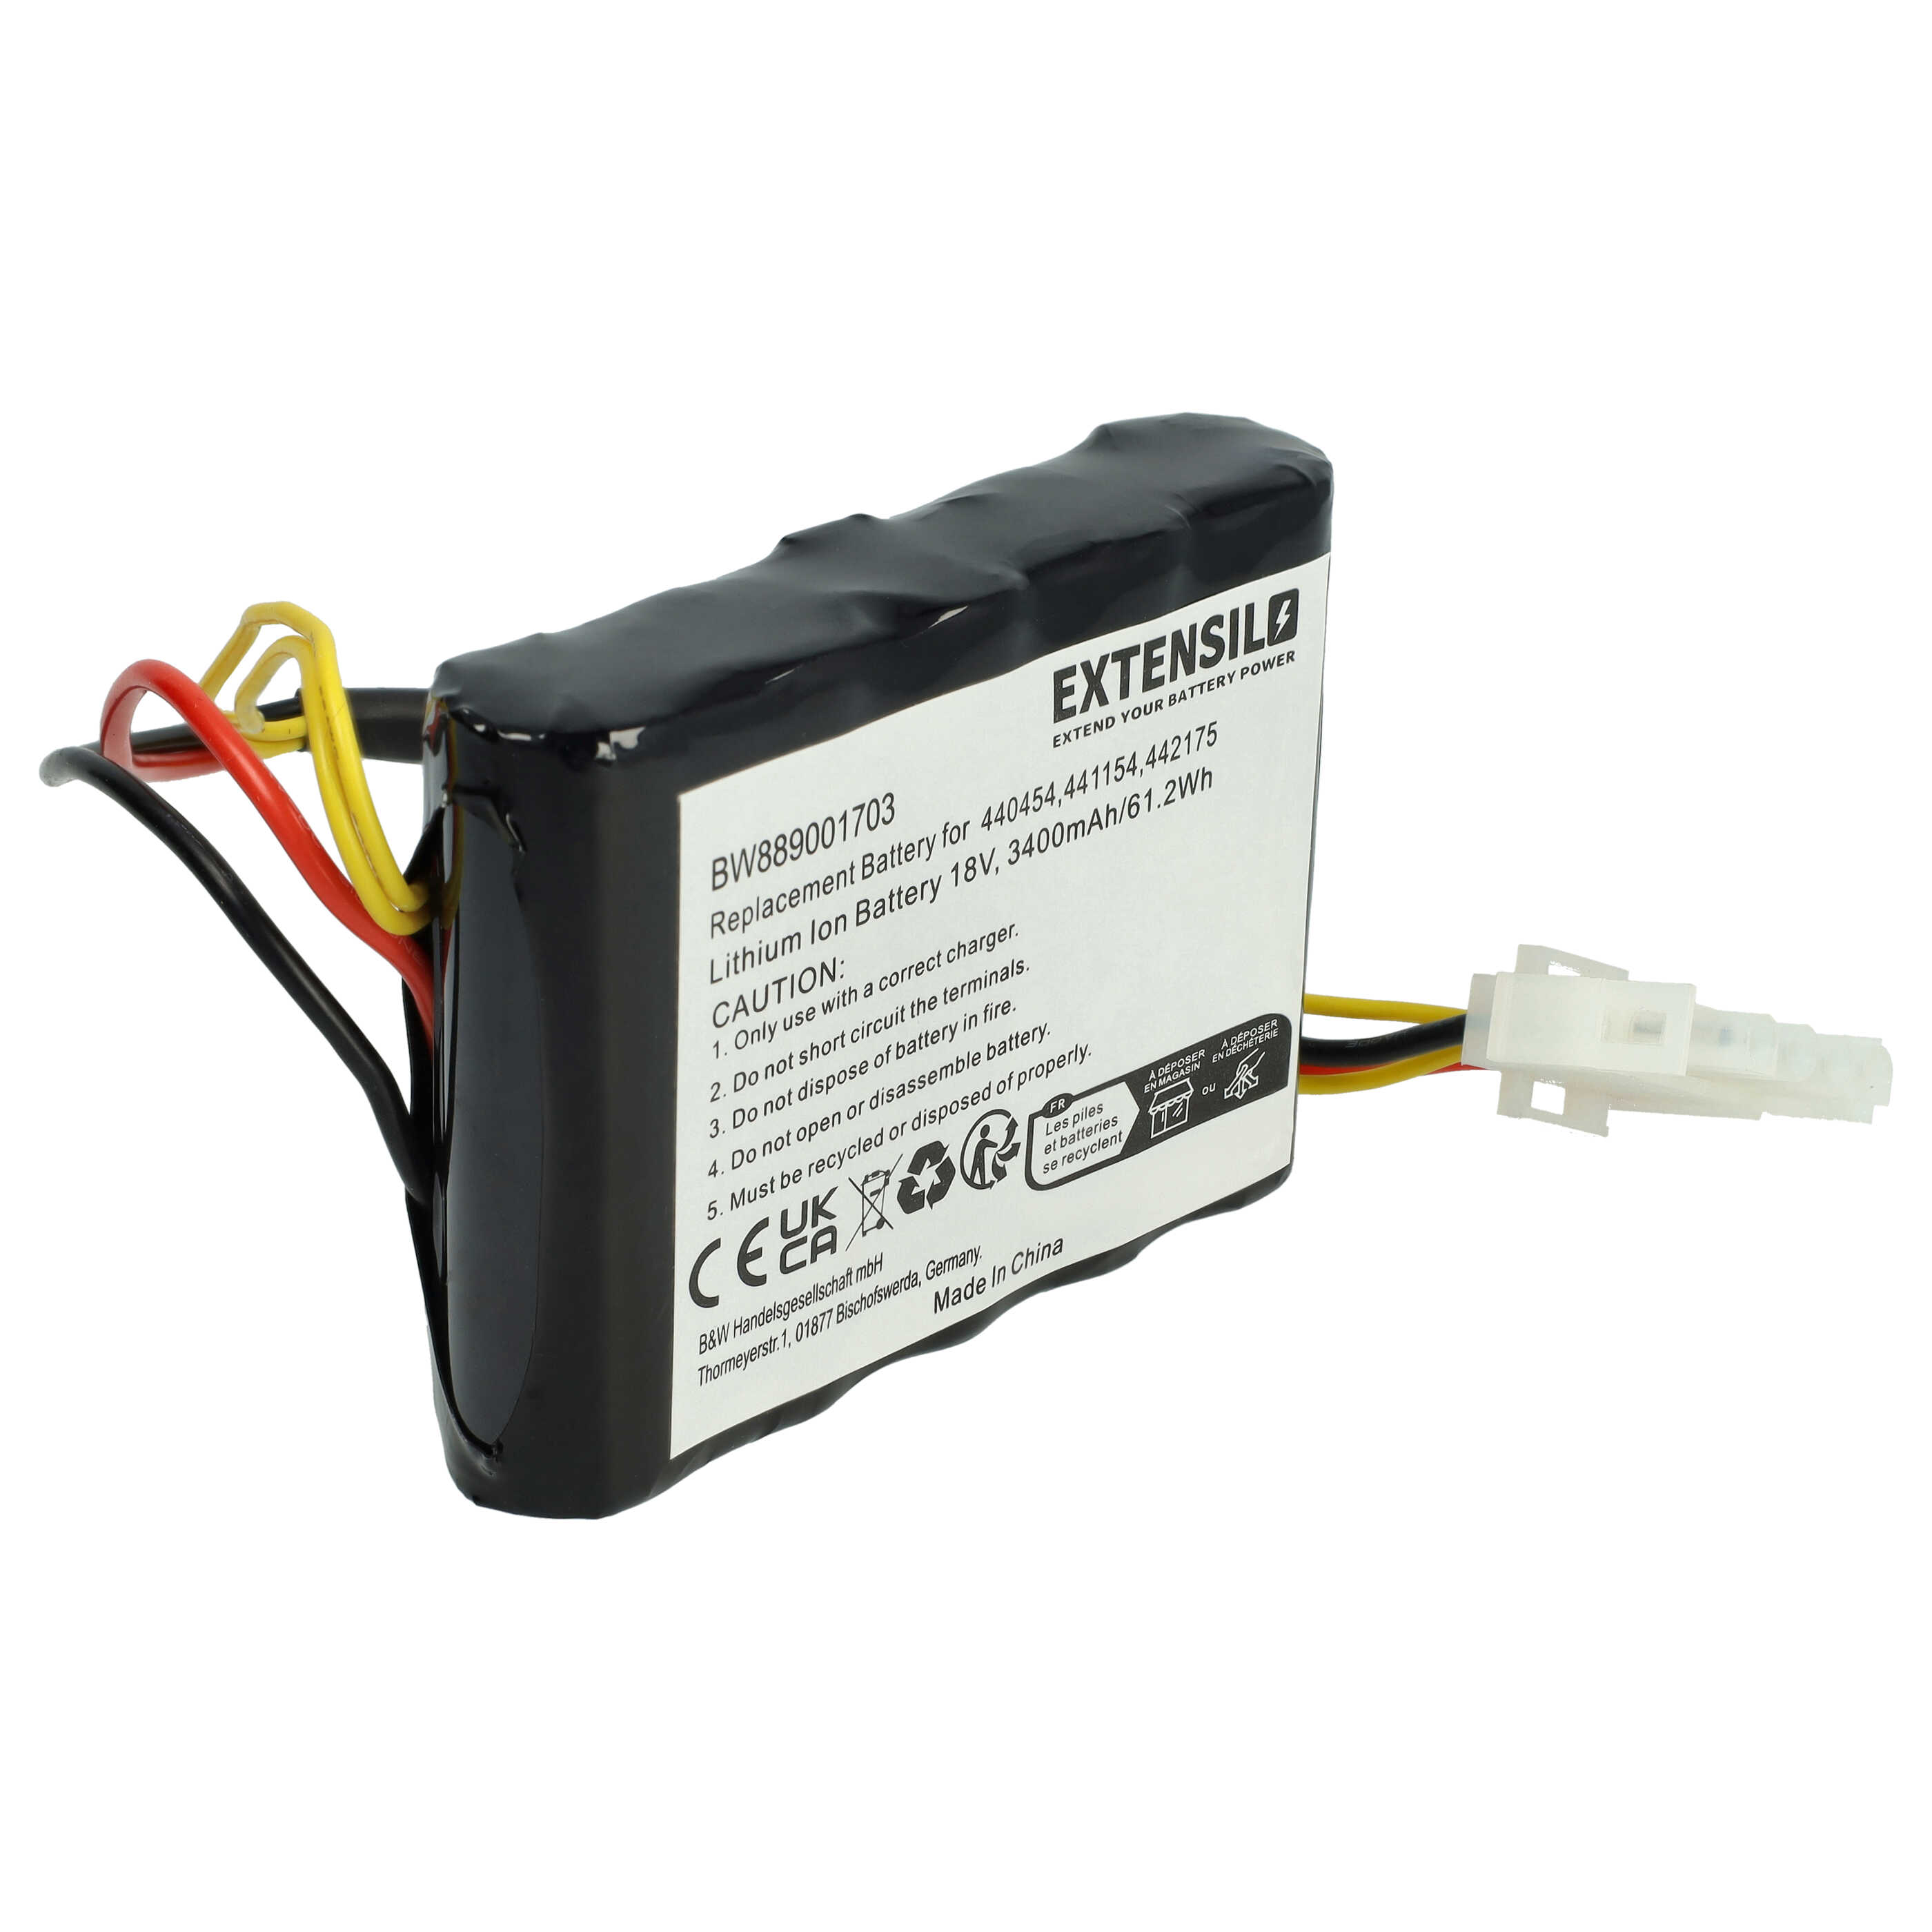 Lawnmower Battery Replacement for Alko 440629, 440454, 442175, 441154, 442632, 442196 - 3400mAh 18V Li-Ion